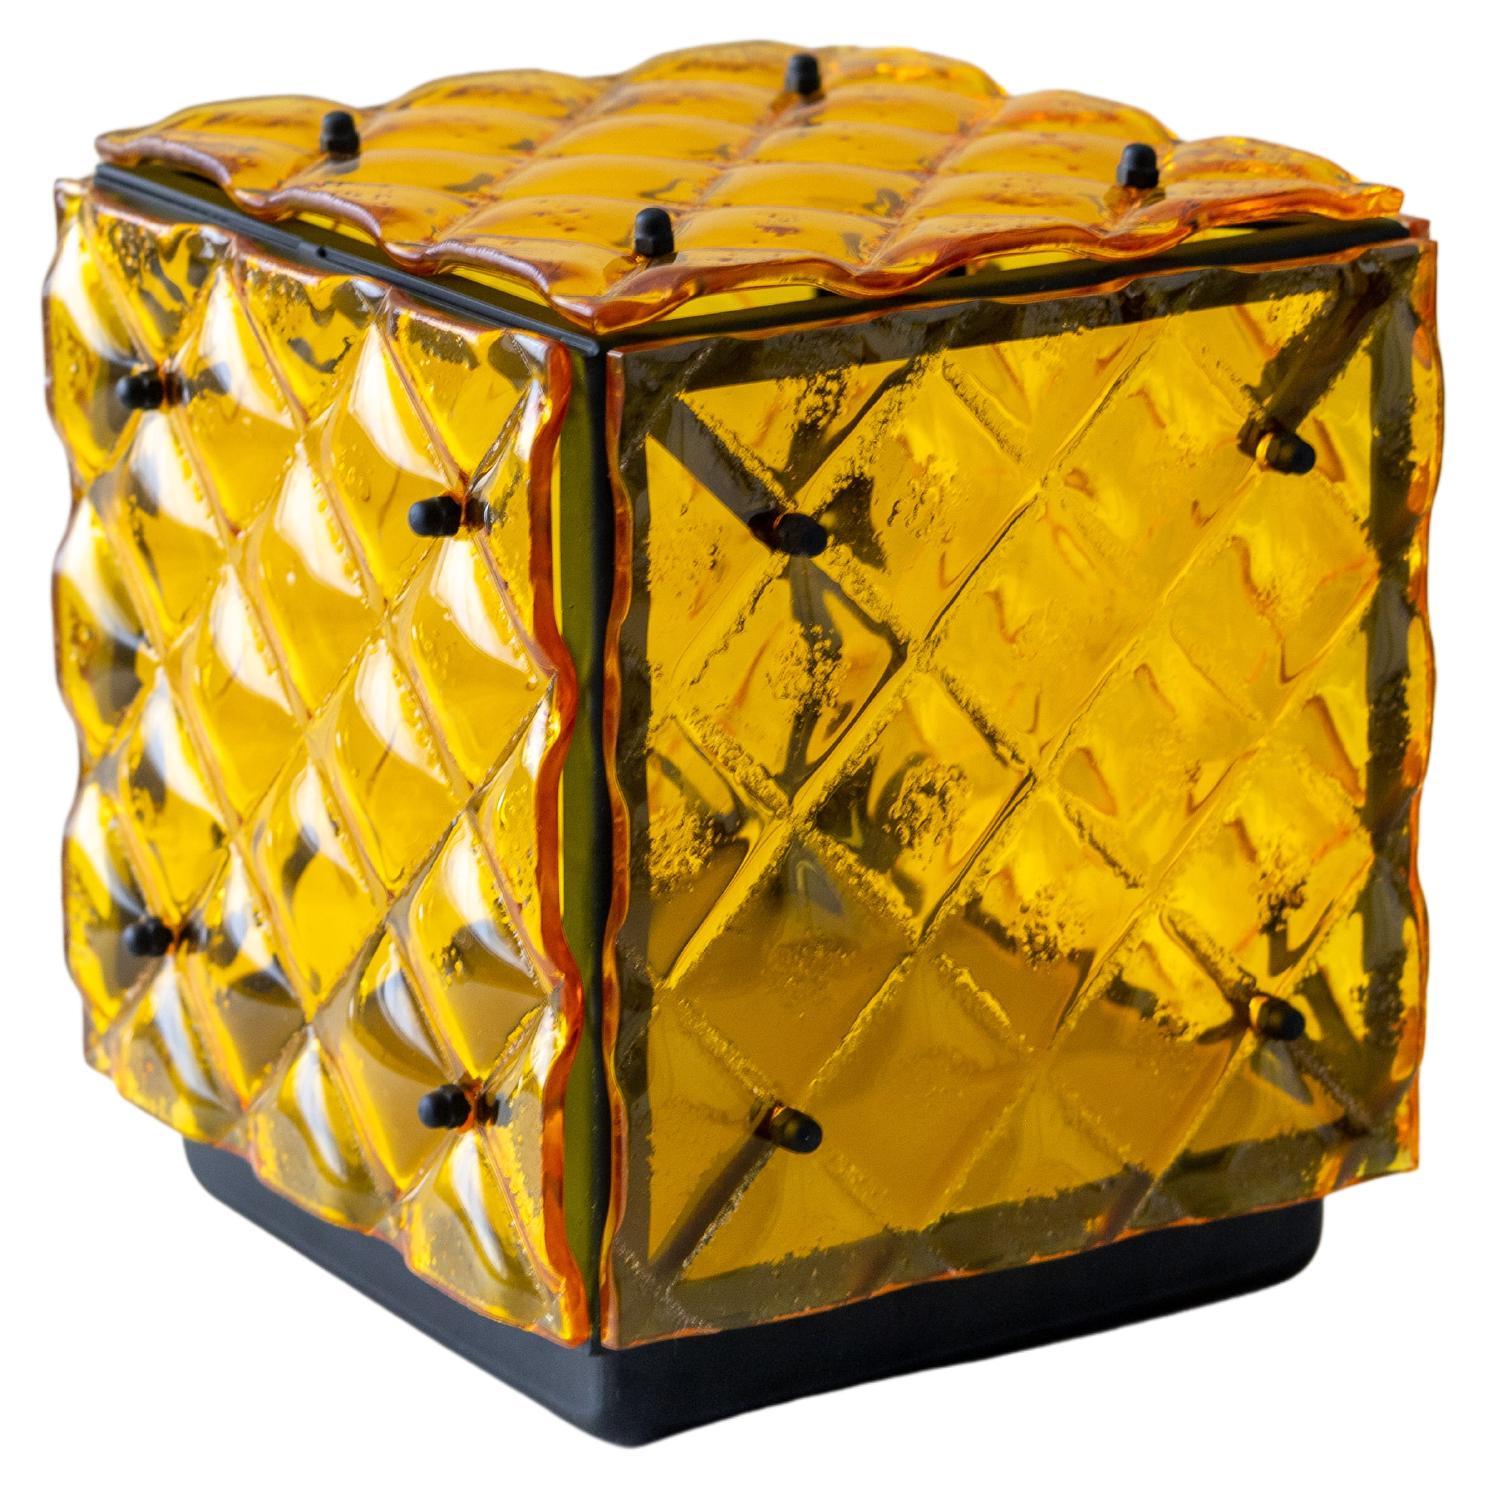 Glass Cube Lamp Yellow Ambient Light Artisanal Fused Glass Contemporary Design